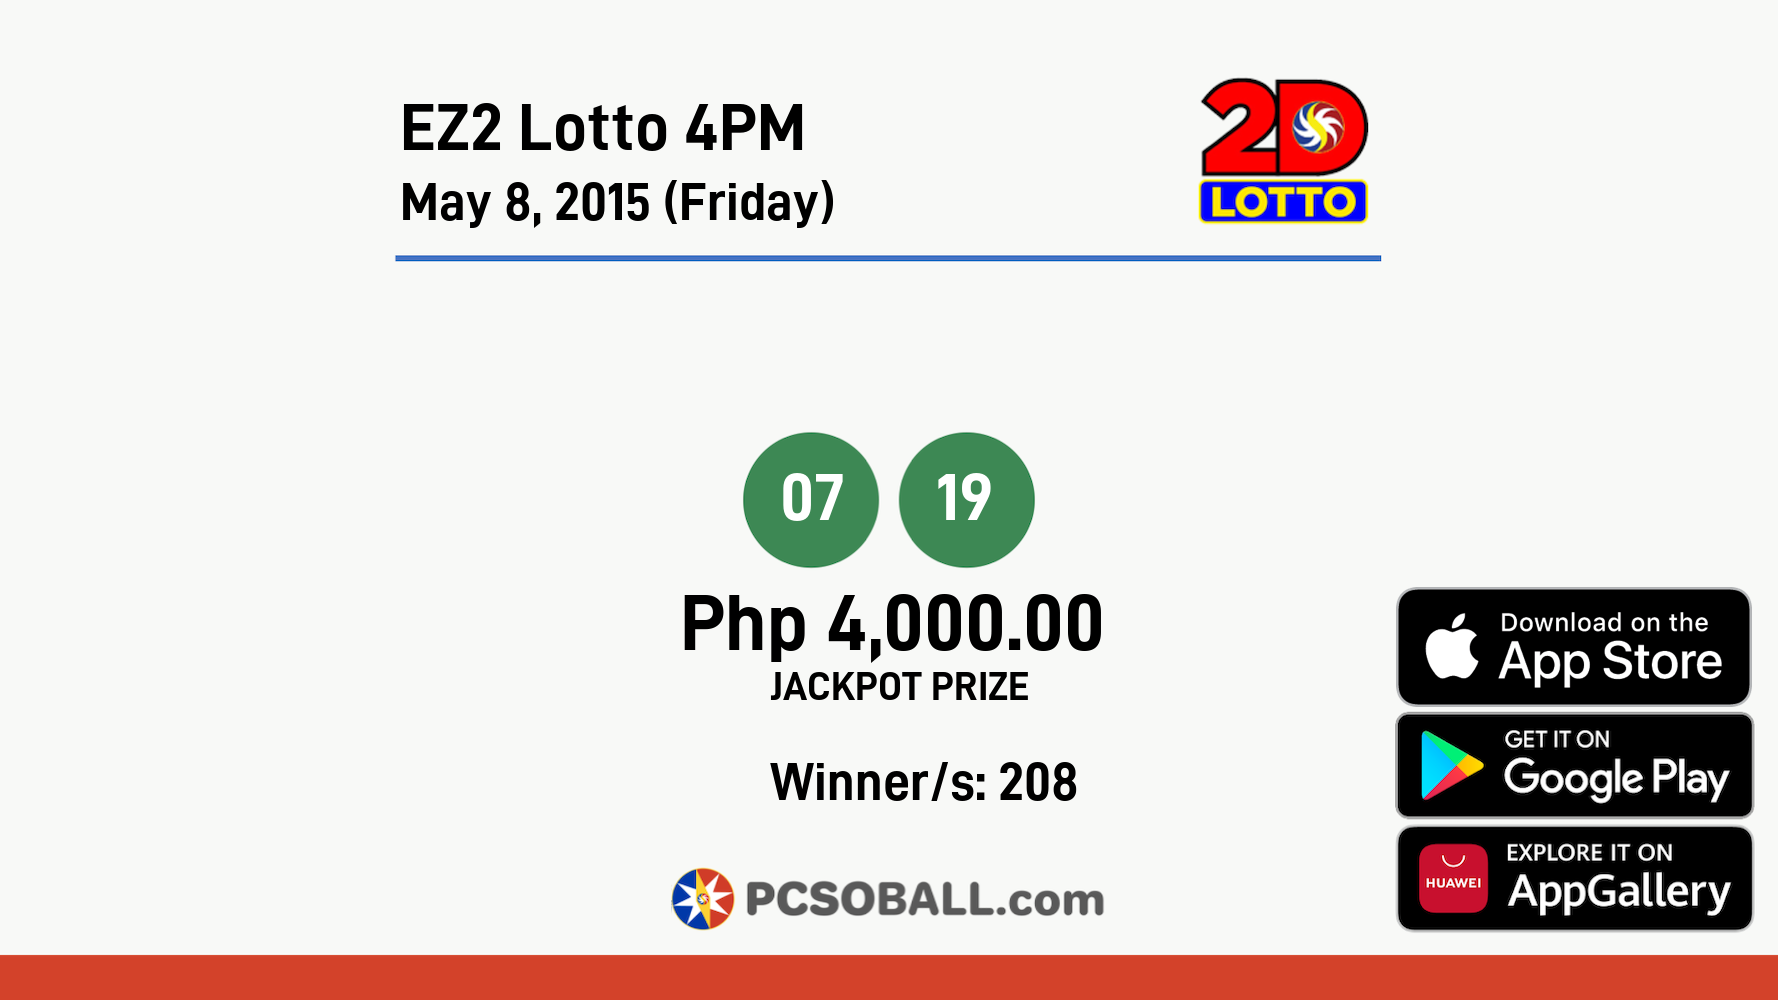 EZ2 Lotto 4PM May 8, 2015 (Friday) Result